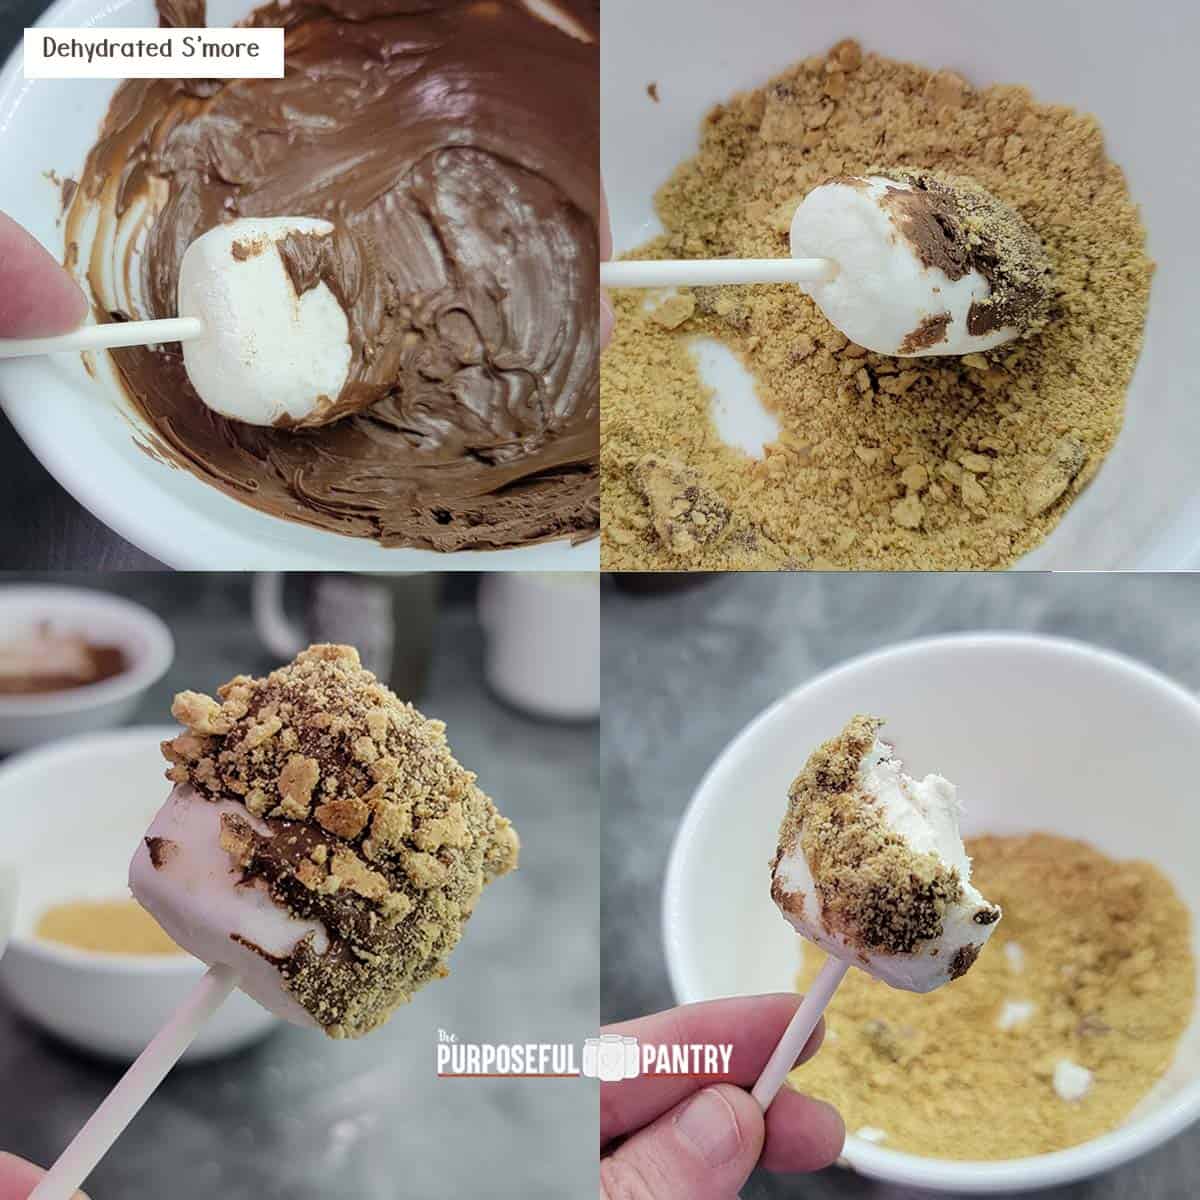 Marshmallow Pop Instructions - dip in chocolate, dip in topping, eat !